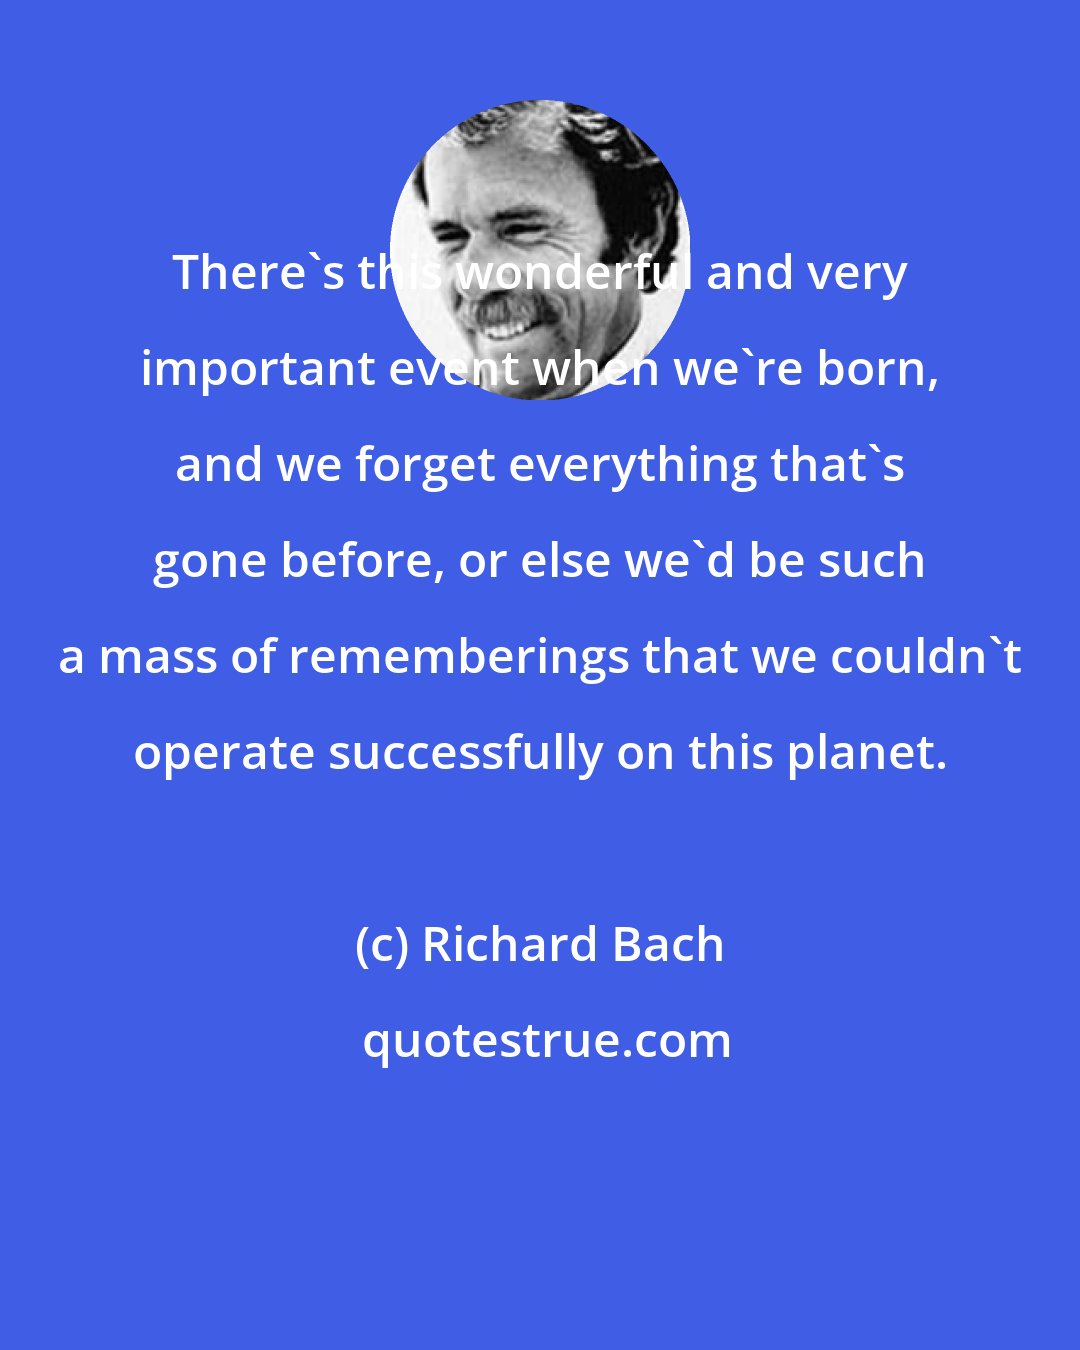 Richard Bach: There's this wonderful and very important event when we're born, and we forget everything that's gone before, or else we'd be such a mass of rememberings that we couldn't operate successfully on this planet.